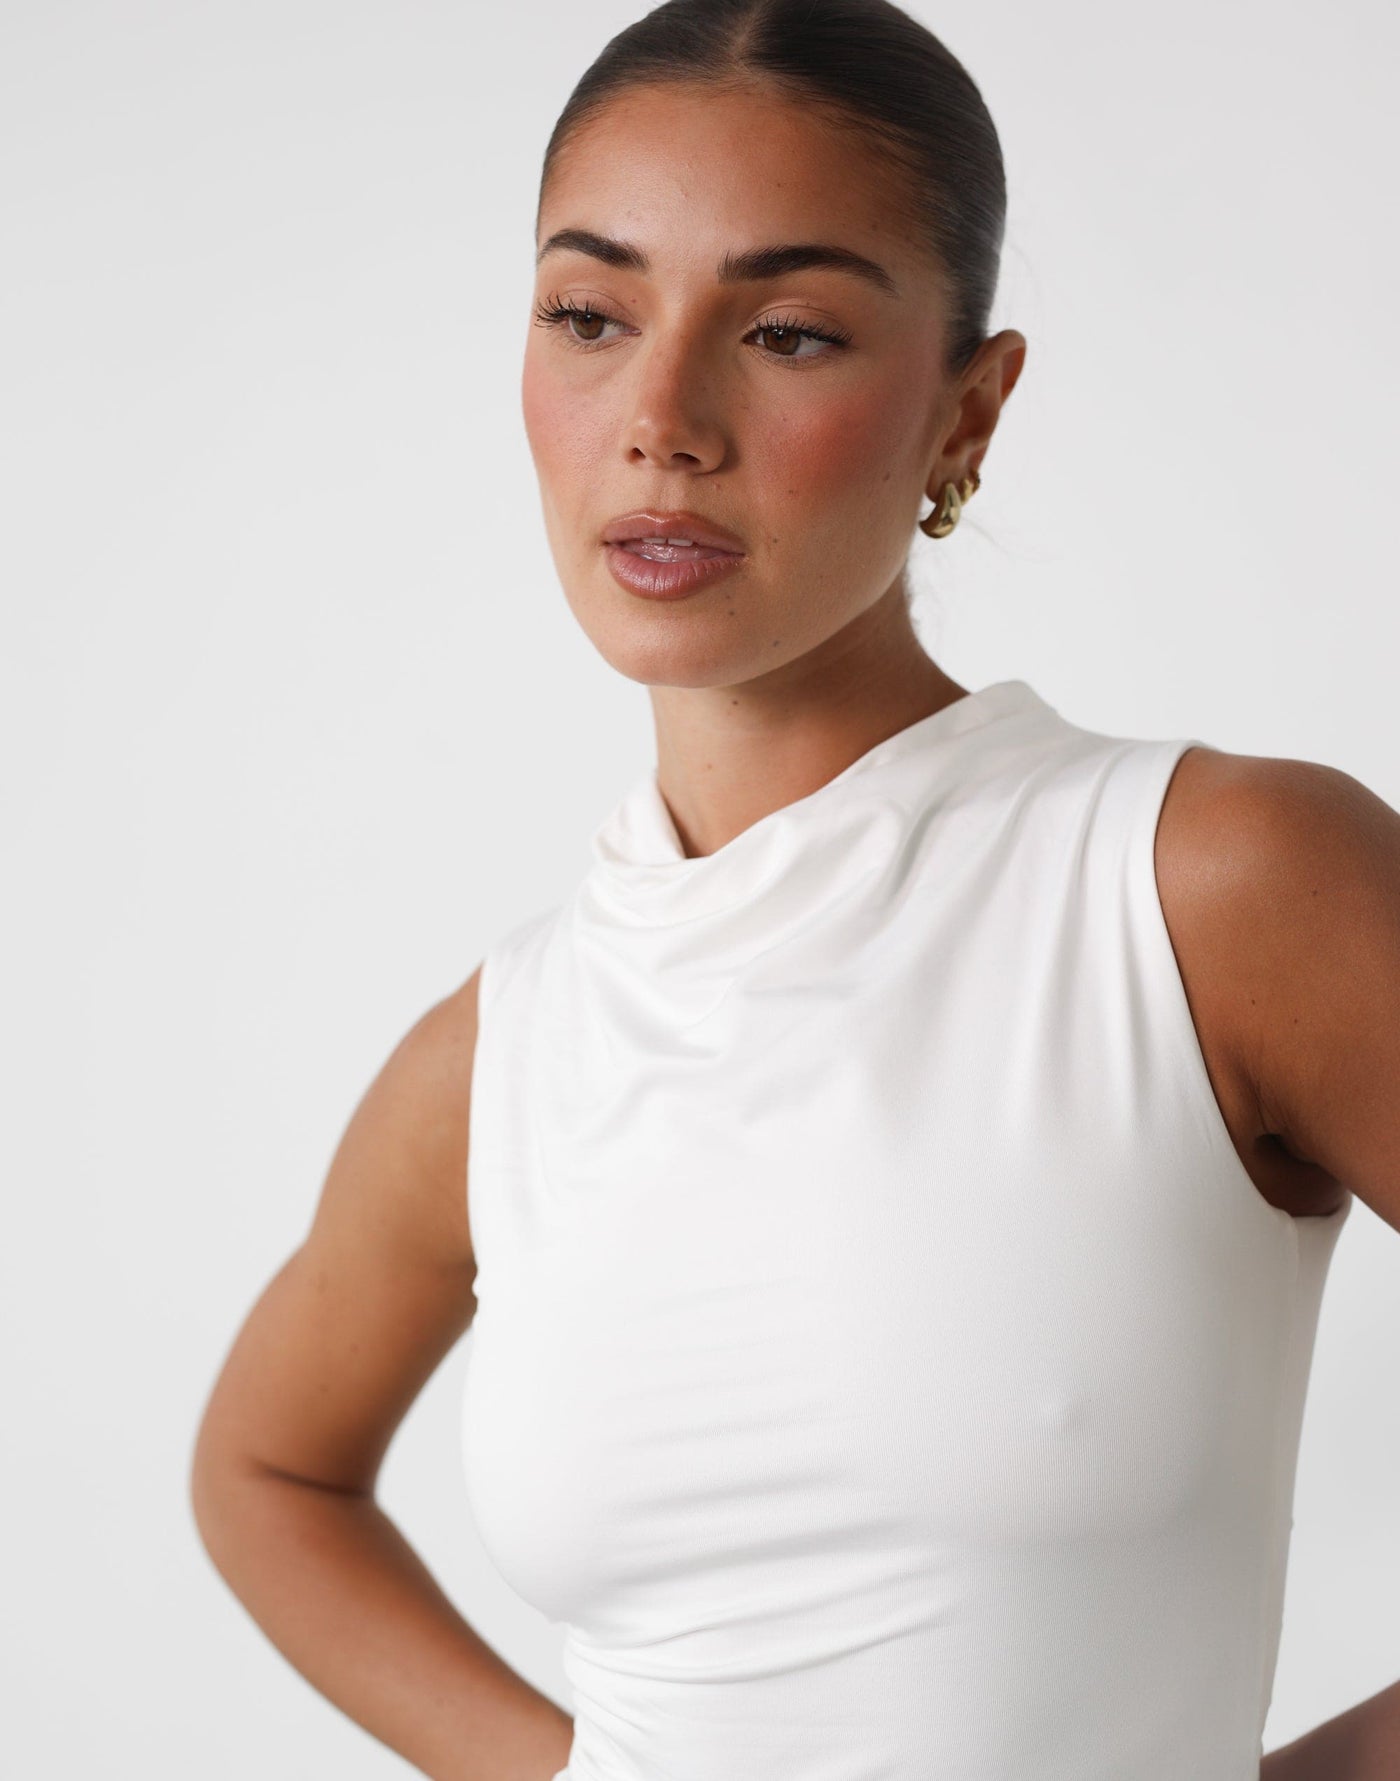 Madison Top (White) - High Cowl Neck Bodycon Top - Women's Top - Charcoal Clothing